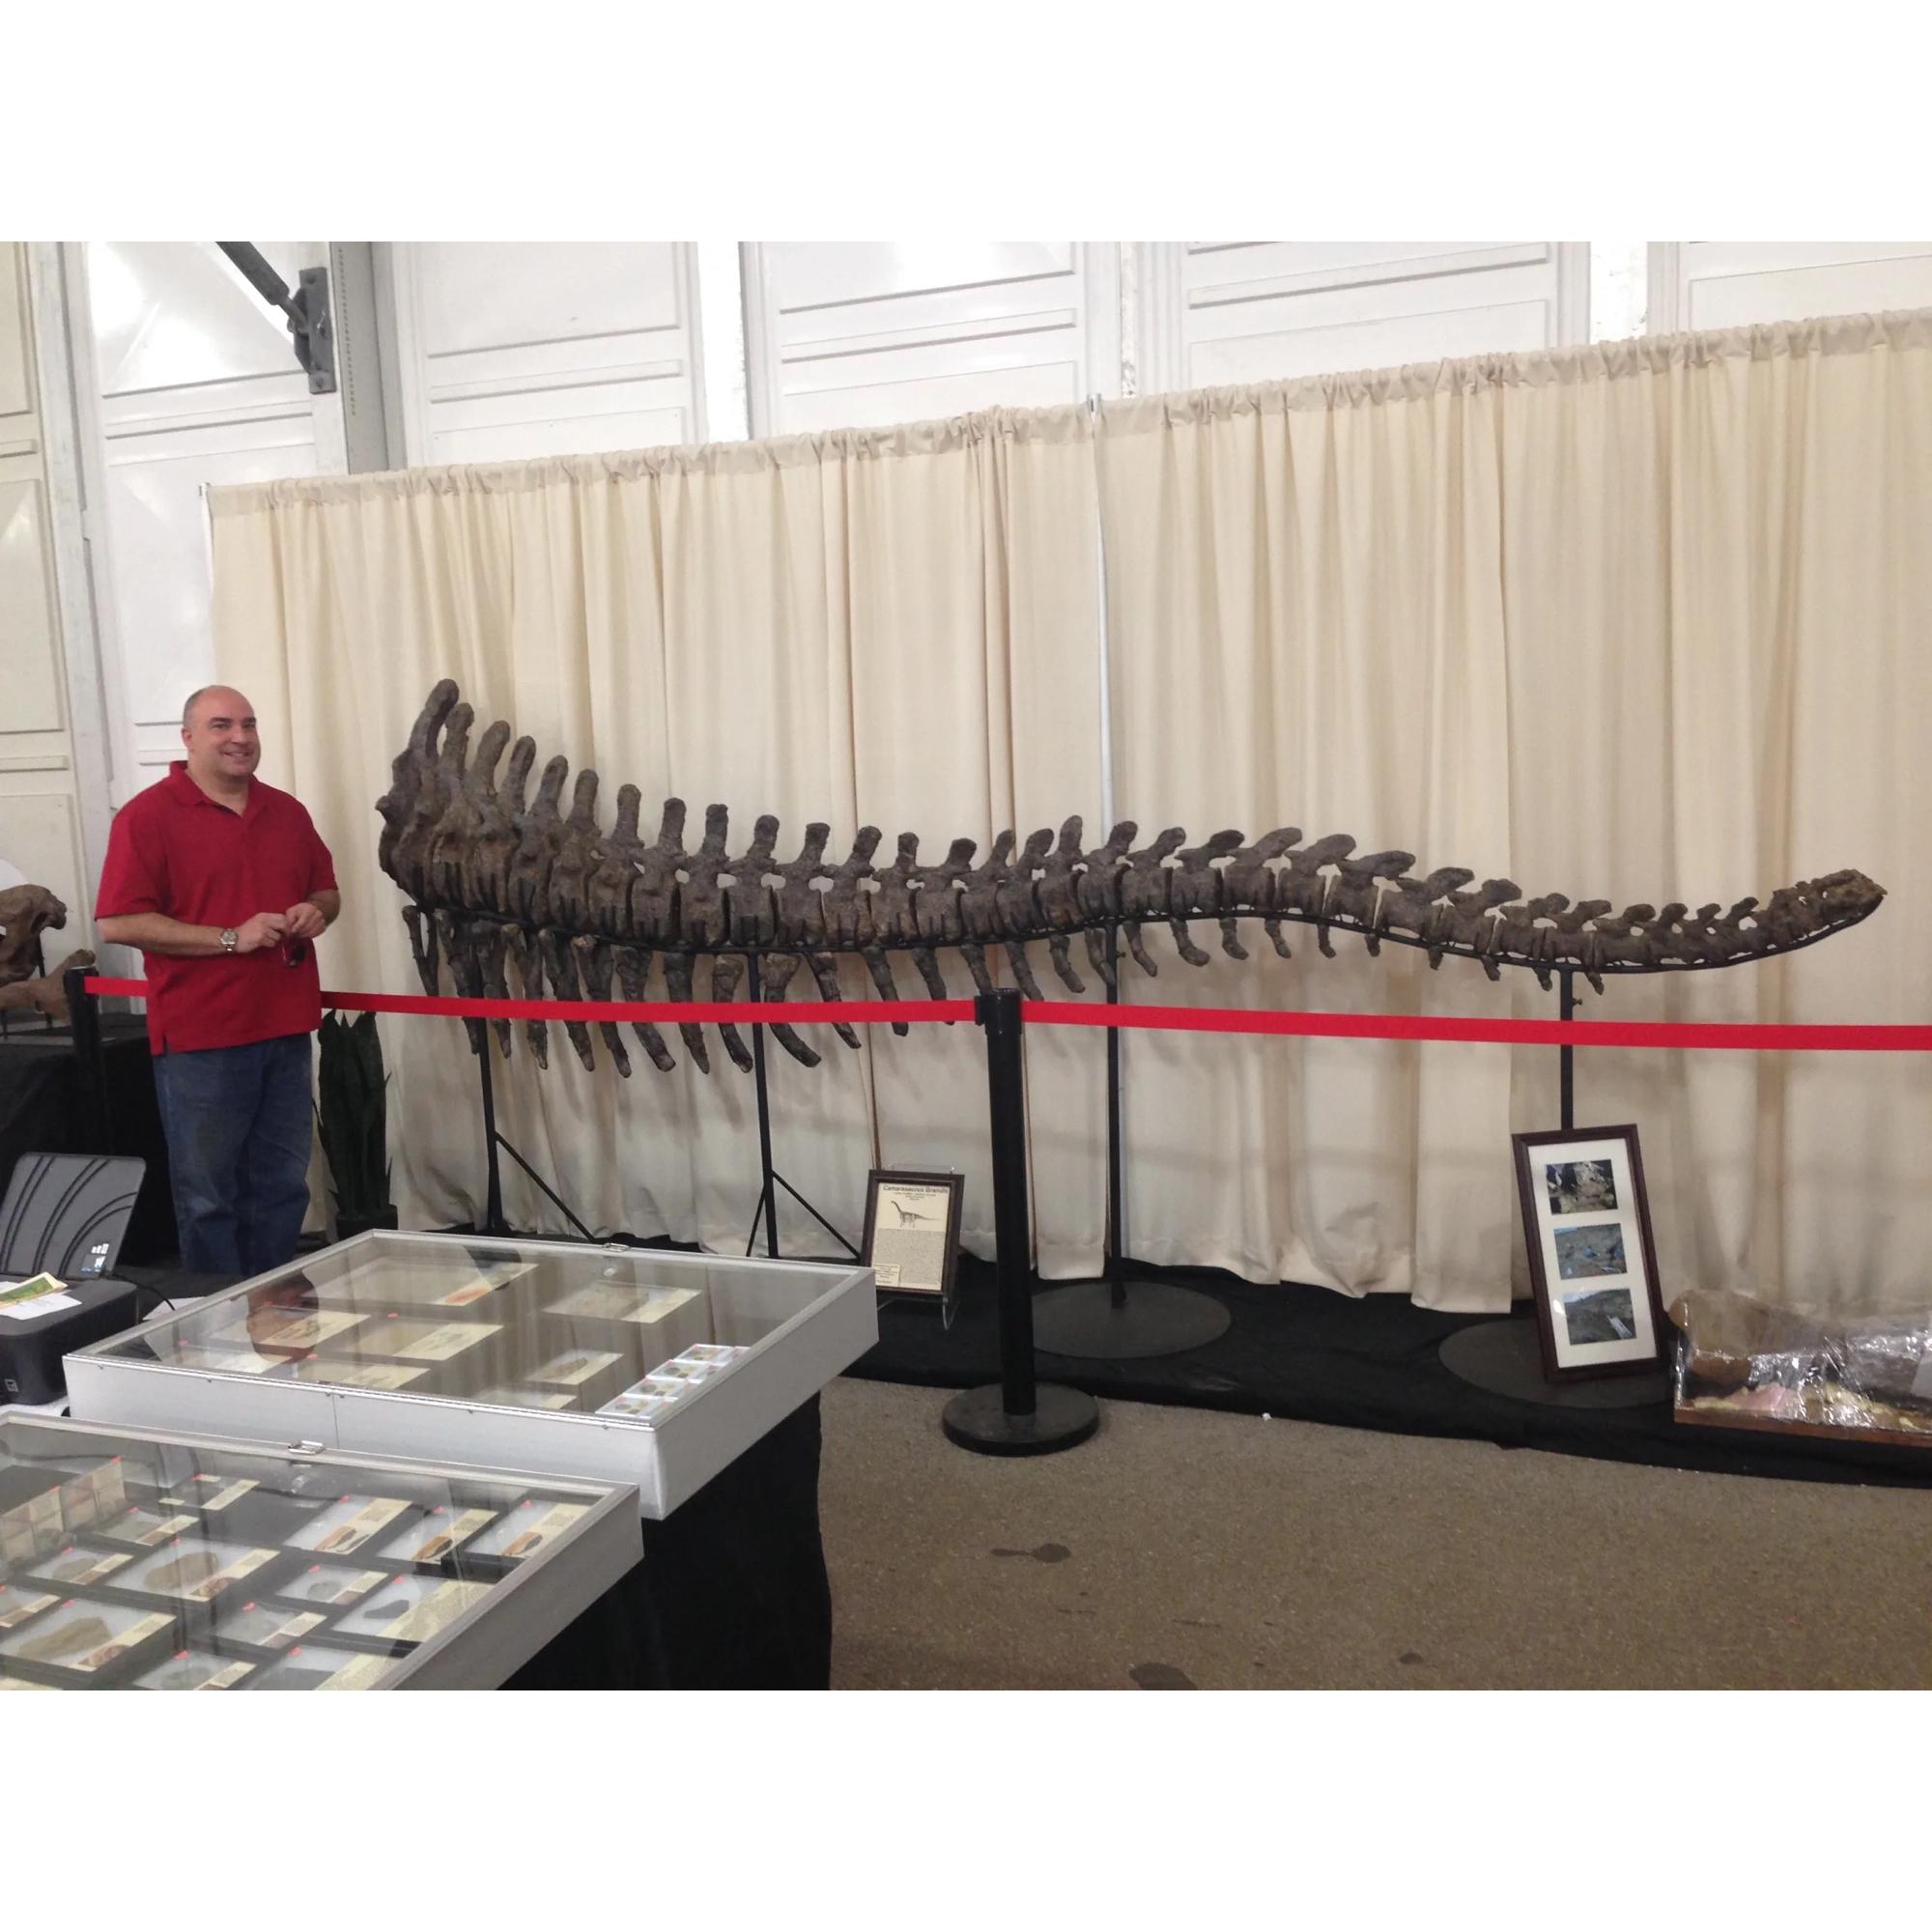 My first visit with my new Camarasaurus Grandis dinosaur tail. What a spectacular dino tail from Wyoming. See this beauty in our Oregon gallery.